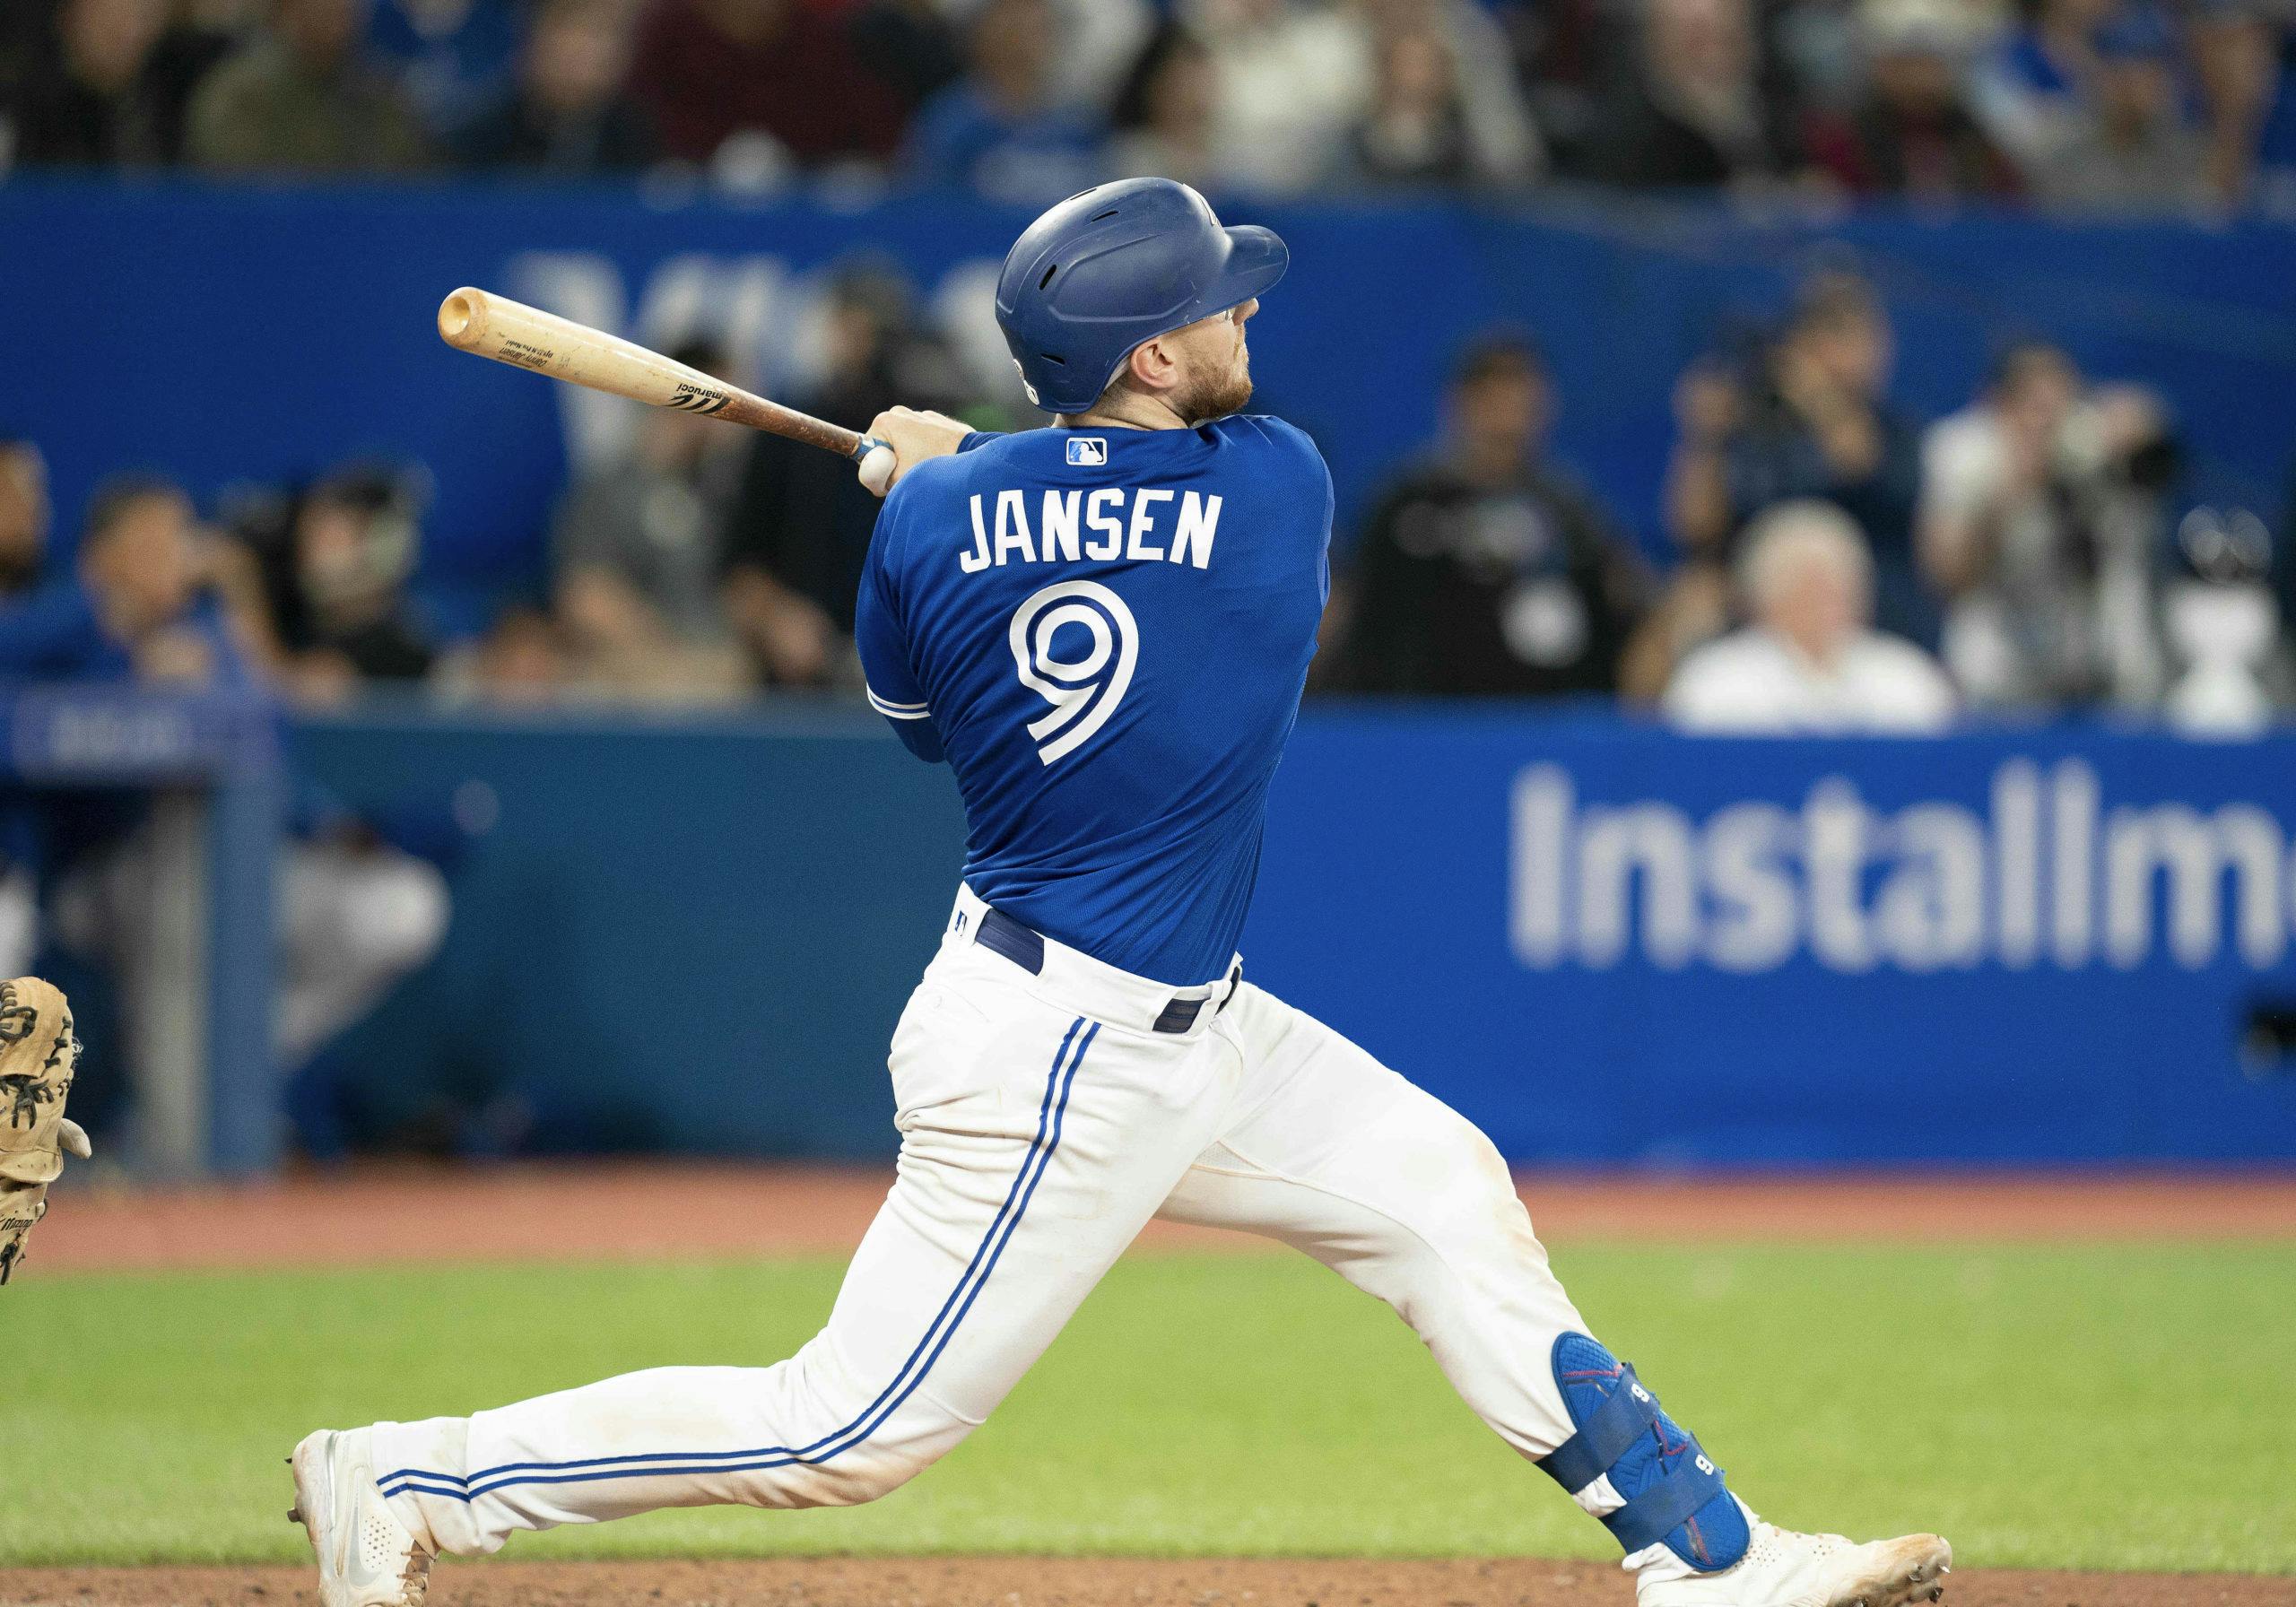 It's time to talk about a Danny Jansen contract extension